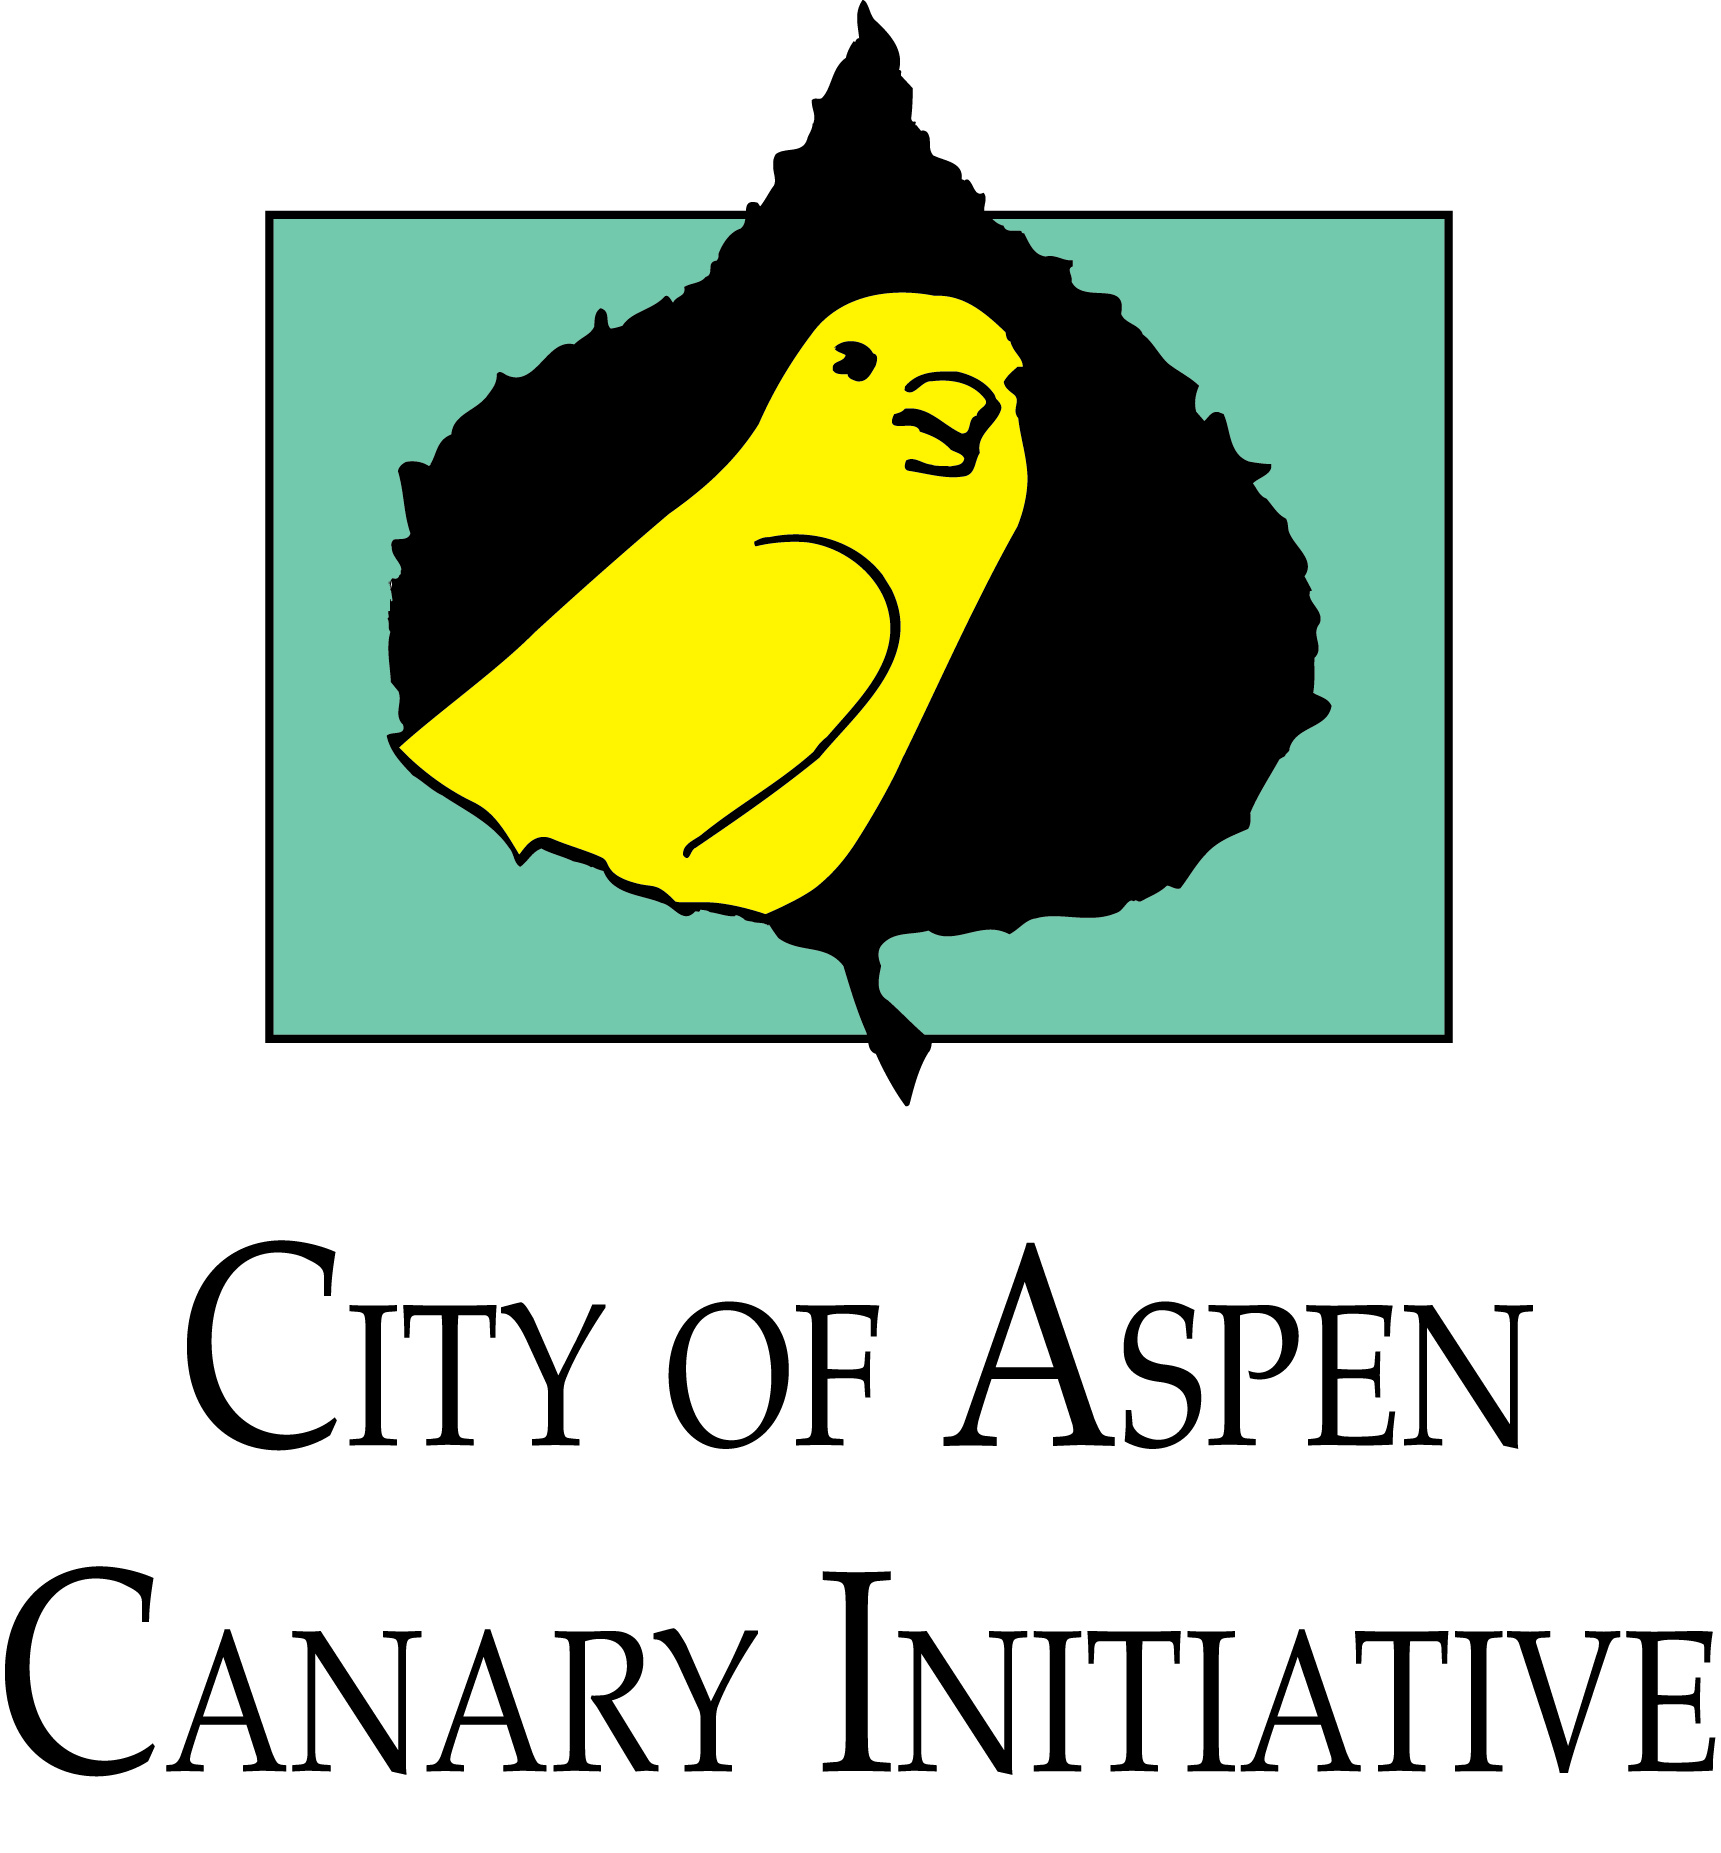  The City of Aspen’s Canary Initiative is a commitment to reducing city and community-wide greenhouse gas (GHG) emissions 30% by 2020 and 80% by 2050. 